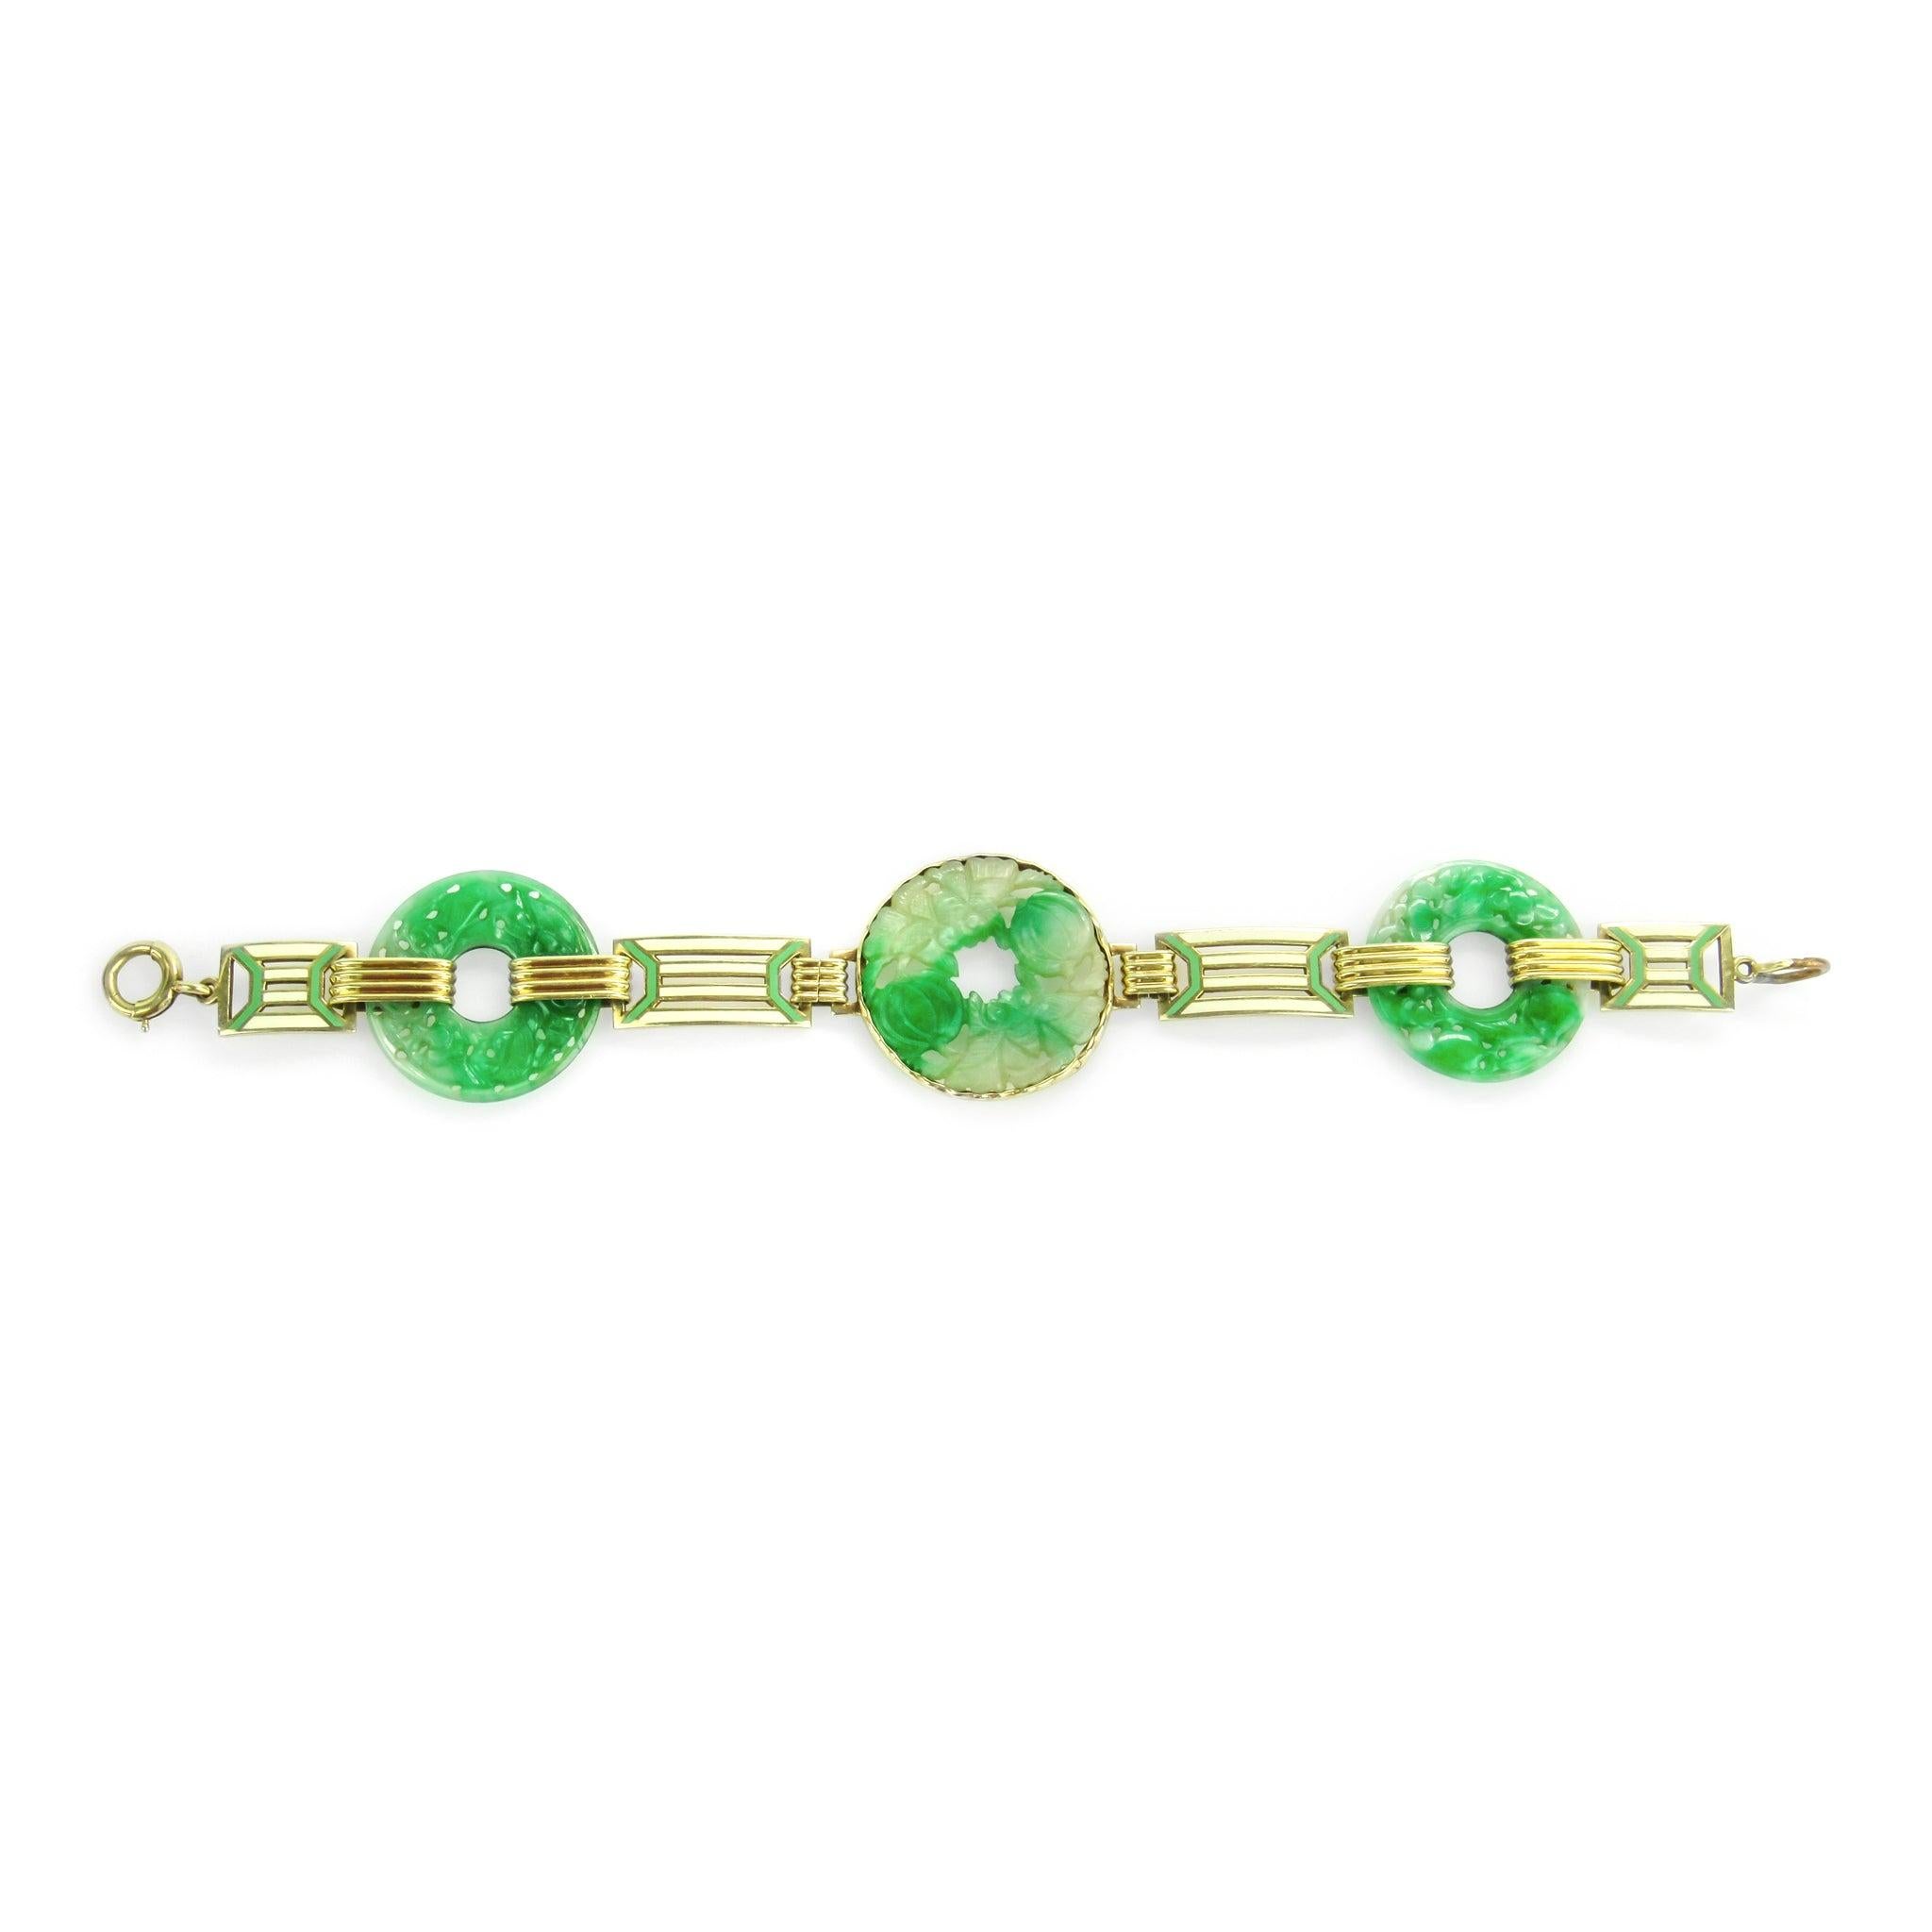 This Art Deco bracelet features three artfully carved jade pi discs connected by geometric links in lime green and white enamel joined by ribbed 14 karat gold links. Signed Wordley, Allsopp & Bliss.

Measurements: 7.5” long by 1 1/8” wide

Condition